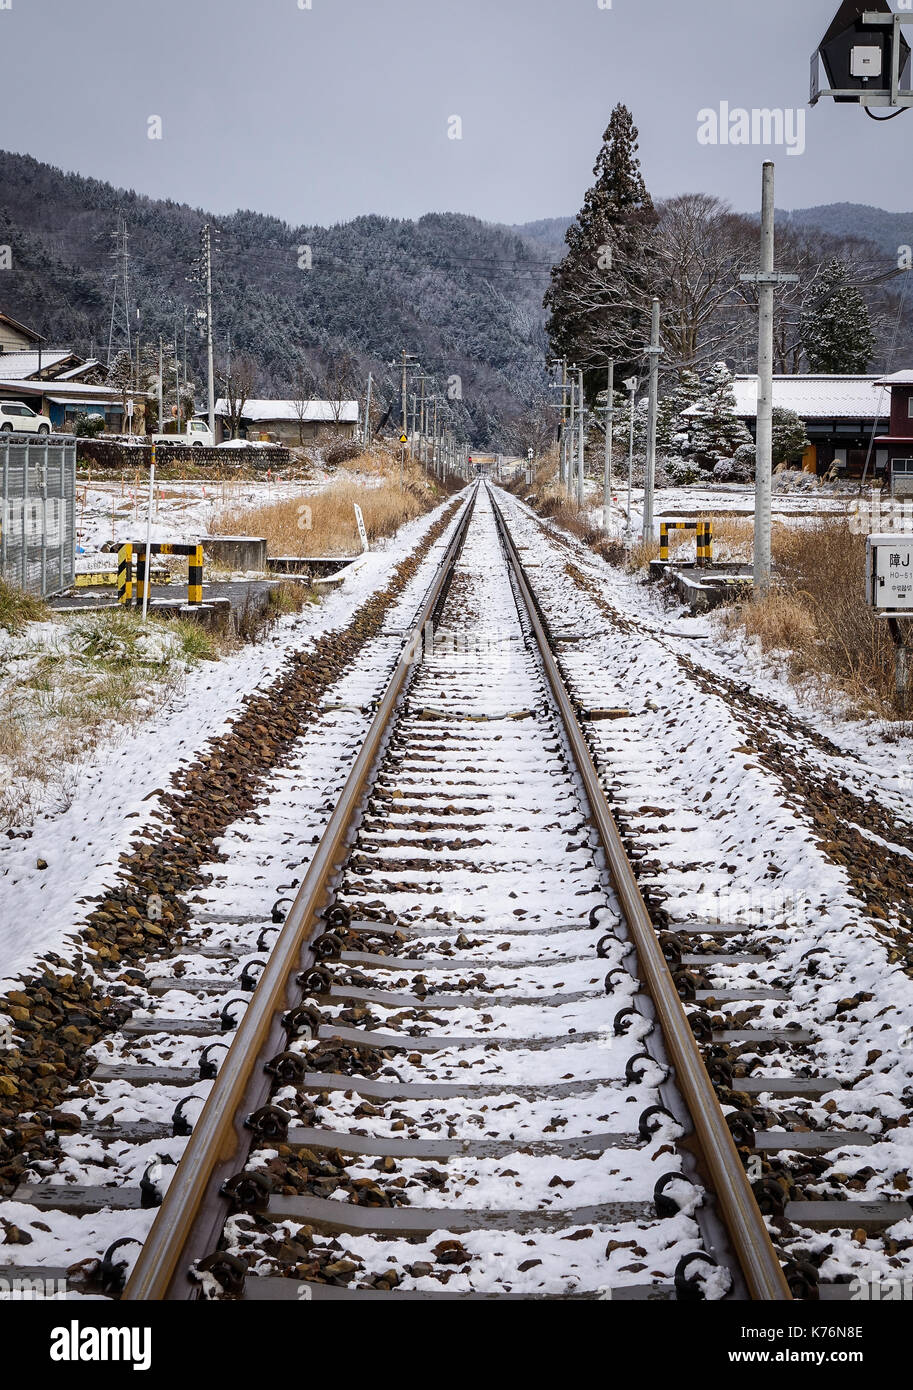 A railtrack at winter in Nagano, Japan. Nagano Prefecture (Nagano-ken) is a landlocked prefecture of Japan located in the Chubu region. Stock Photo